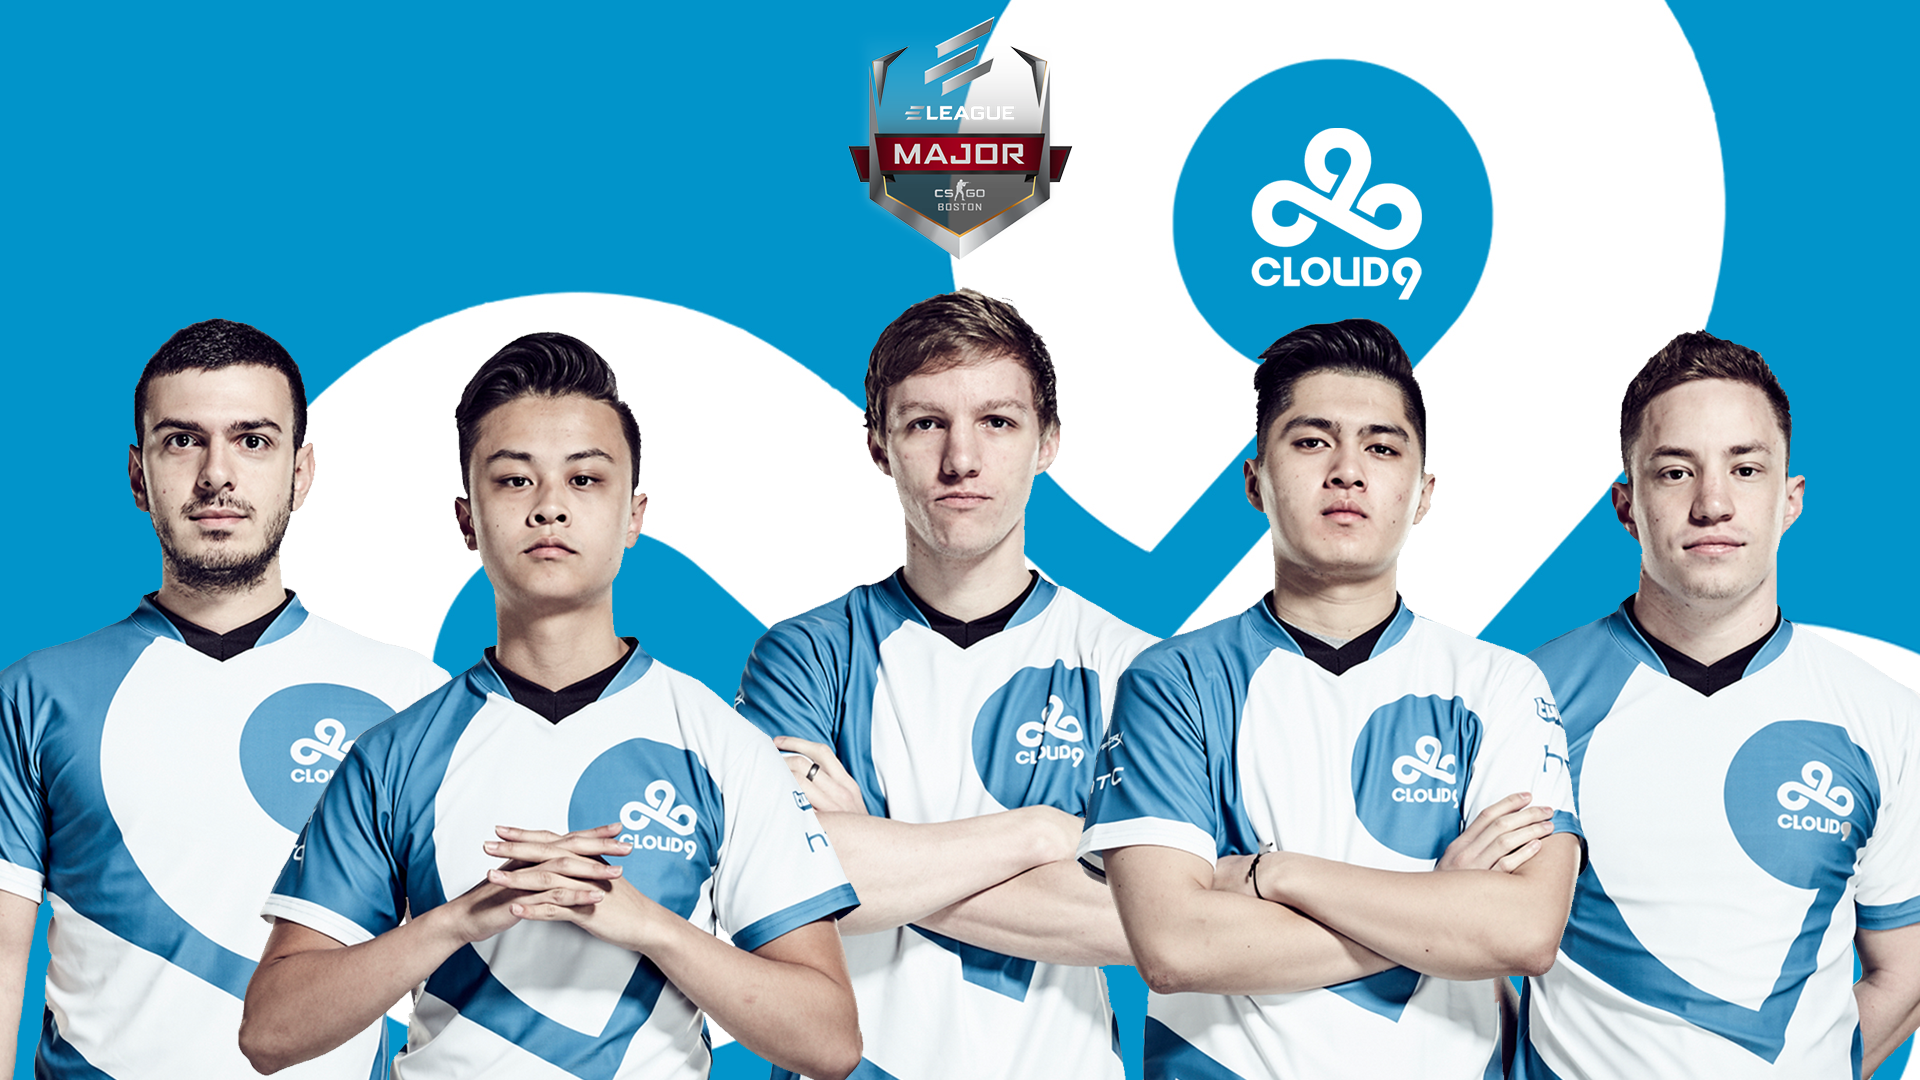 Made A Quick Eleague Boston Wallpaper Of C9 Didnt Have Much Time